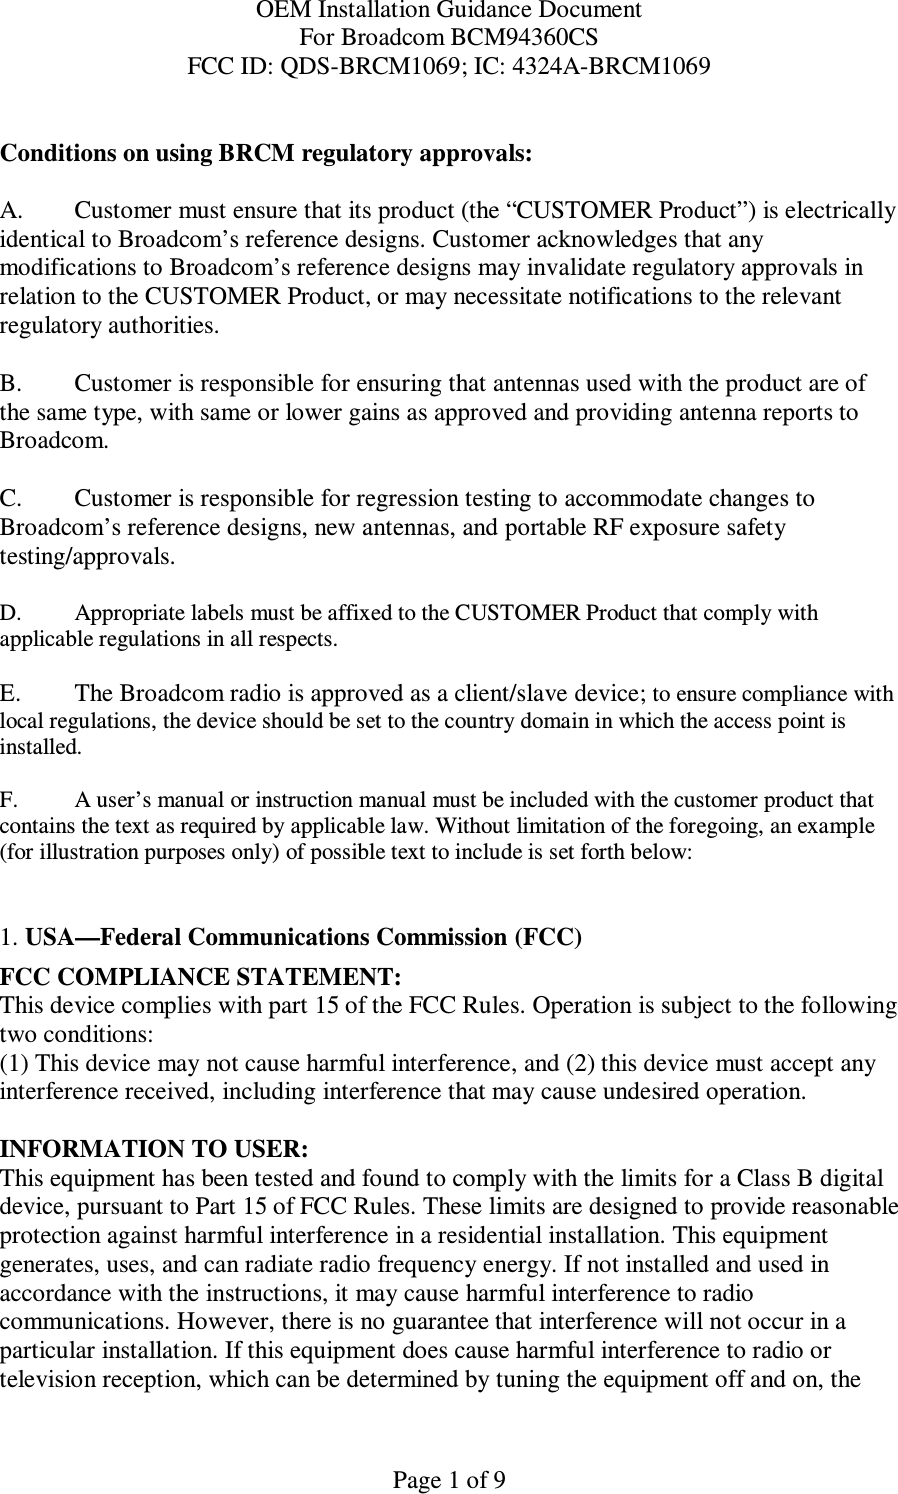 OEM Installation Guidance Document For Broadcom BCM94360CS FCC ID: QDS-BRCM1069; IC: 4324A-BRCM1069  Page 1 of 9  Conditions on using BRCM regulatory approvals:   A.  Customer must ensure that its product (the “CUSTOMER Product”) is electrically identical to Broadcom’s reference designs. Customer acknowledges that any modifications to Broadcom’s reference designs may invalidate regulatory approvals in relation to the CUSTOMER Product, or may necessitate notifications to the relevant regulatory authorities.  B.   Customer is responsible for ensuring that antennas used with the product are of the same type, with same or lower gains as approved and providing antenna reports to Broadcom.  C.   Customer is responsible for regression testing to accommodate changes to Broadcom’s reference designs, new antennas, and portable RF exposure safety testing/approvals.  D.  Appropriate labels must be affixed to the CUSTOMER Product that comply with  applicable regulations in all respects.    E.   The Broadcom radio is approved as a client/slave device; to ensure compliance with local regulations, the device should be set to the country domain in which the access point is installed.  F.  A user’s manual or instruction manual must be included with the customer product that contains the text as required by applicable law. Without limitation of the foregoing, an example (for illustration purposes only) of possible text to include is set forth below:    1. USA—Federal Communications Commission (FCC) FCC COMPLIANCE STATEMENT: This device complies with part 15 of the FCC Rules. Operation is subject to the following two conditions: (1) This device may not cause harmful interference, and (2) this device must accept any interference received, including interference that may cause undesired operation.  INFORMATION TO USER: This equipment has been tested and found to comply with the limits for a Class B digital device, pursuant to Part 15 of FCC Rules. These limits are designed to provide reasonable protection against harmful interference in a residential installation. This equipment generates, uses, and can radiate radio frequency energy. If not installed and used in accordance with the instructions, it may cause harmful interference to radio communications. However, there is no guarantee that interference will not occur in a particular installation. If this equipment does cause harmful interference to radio or television reception, which can be determined by tuning the equipment off and on, the 